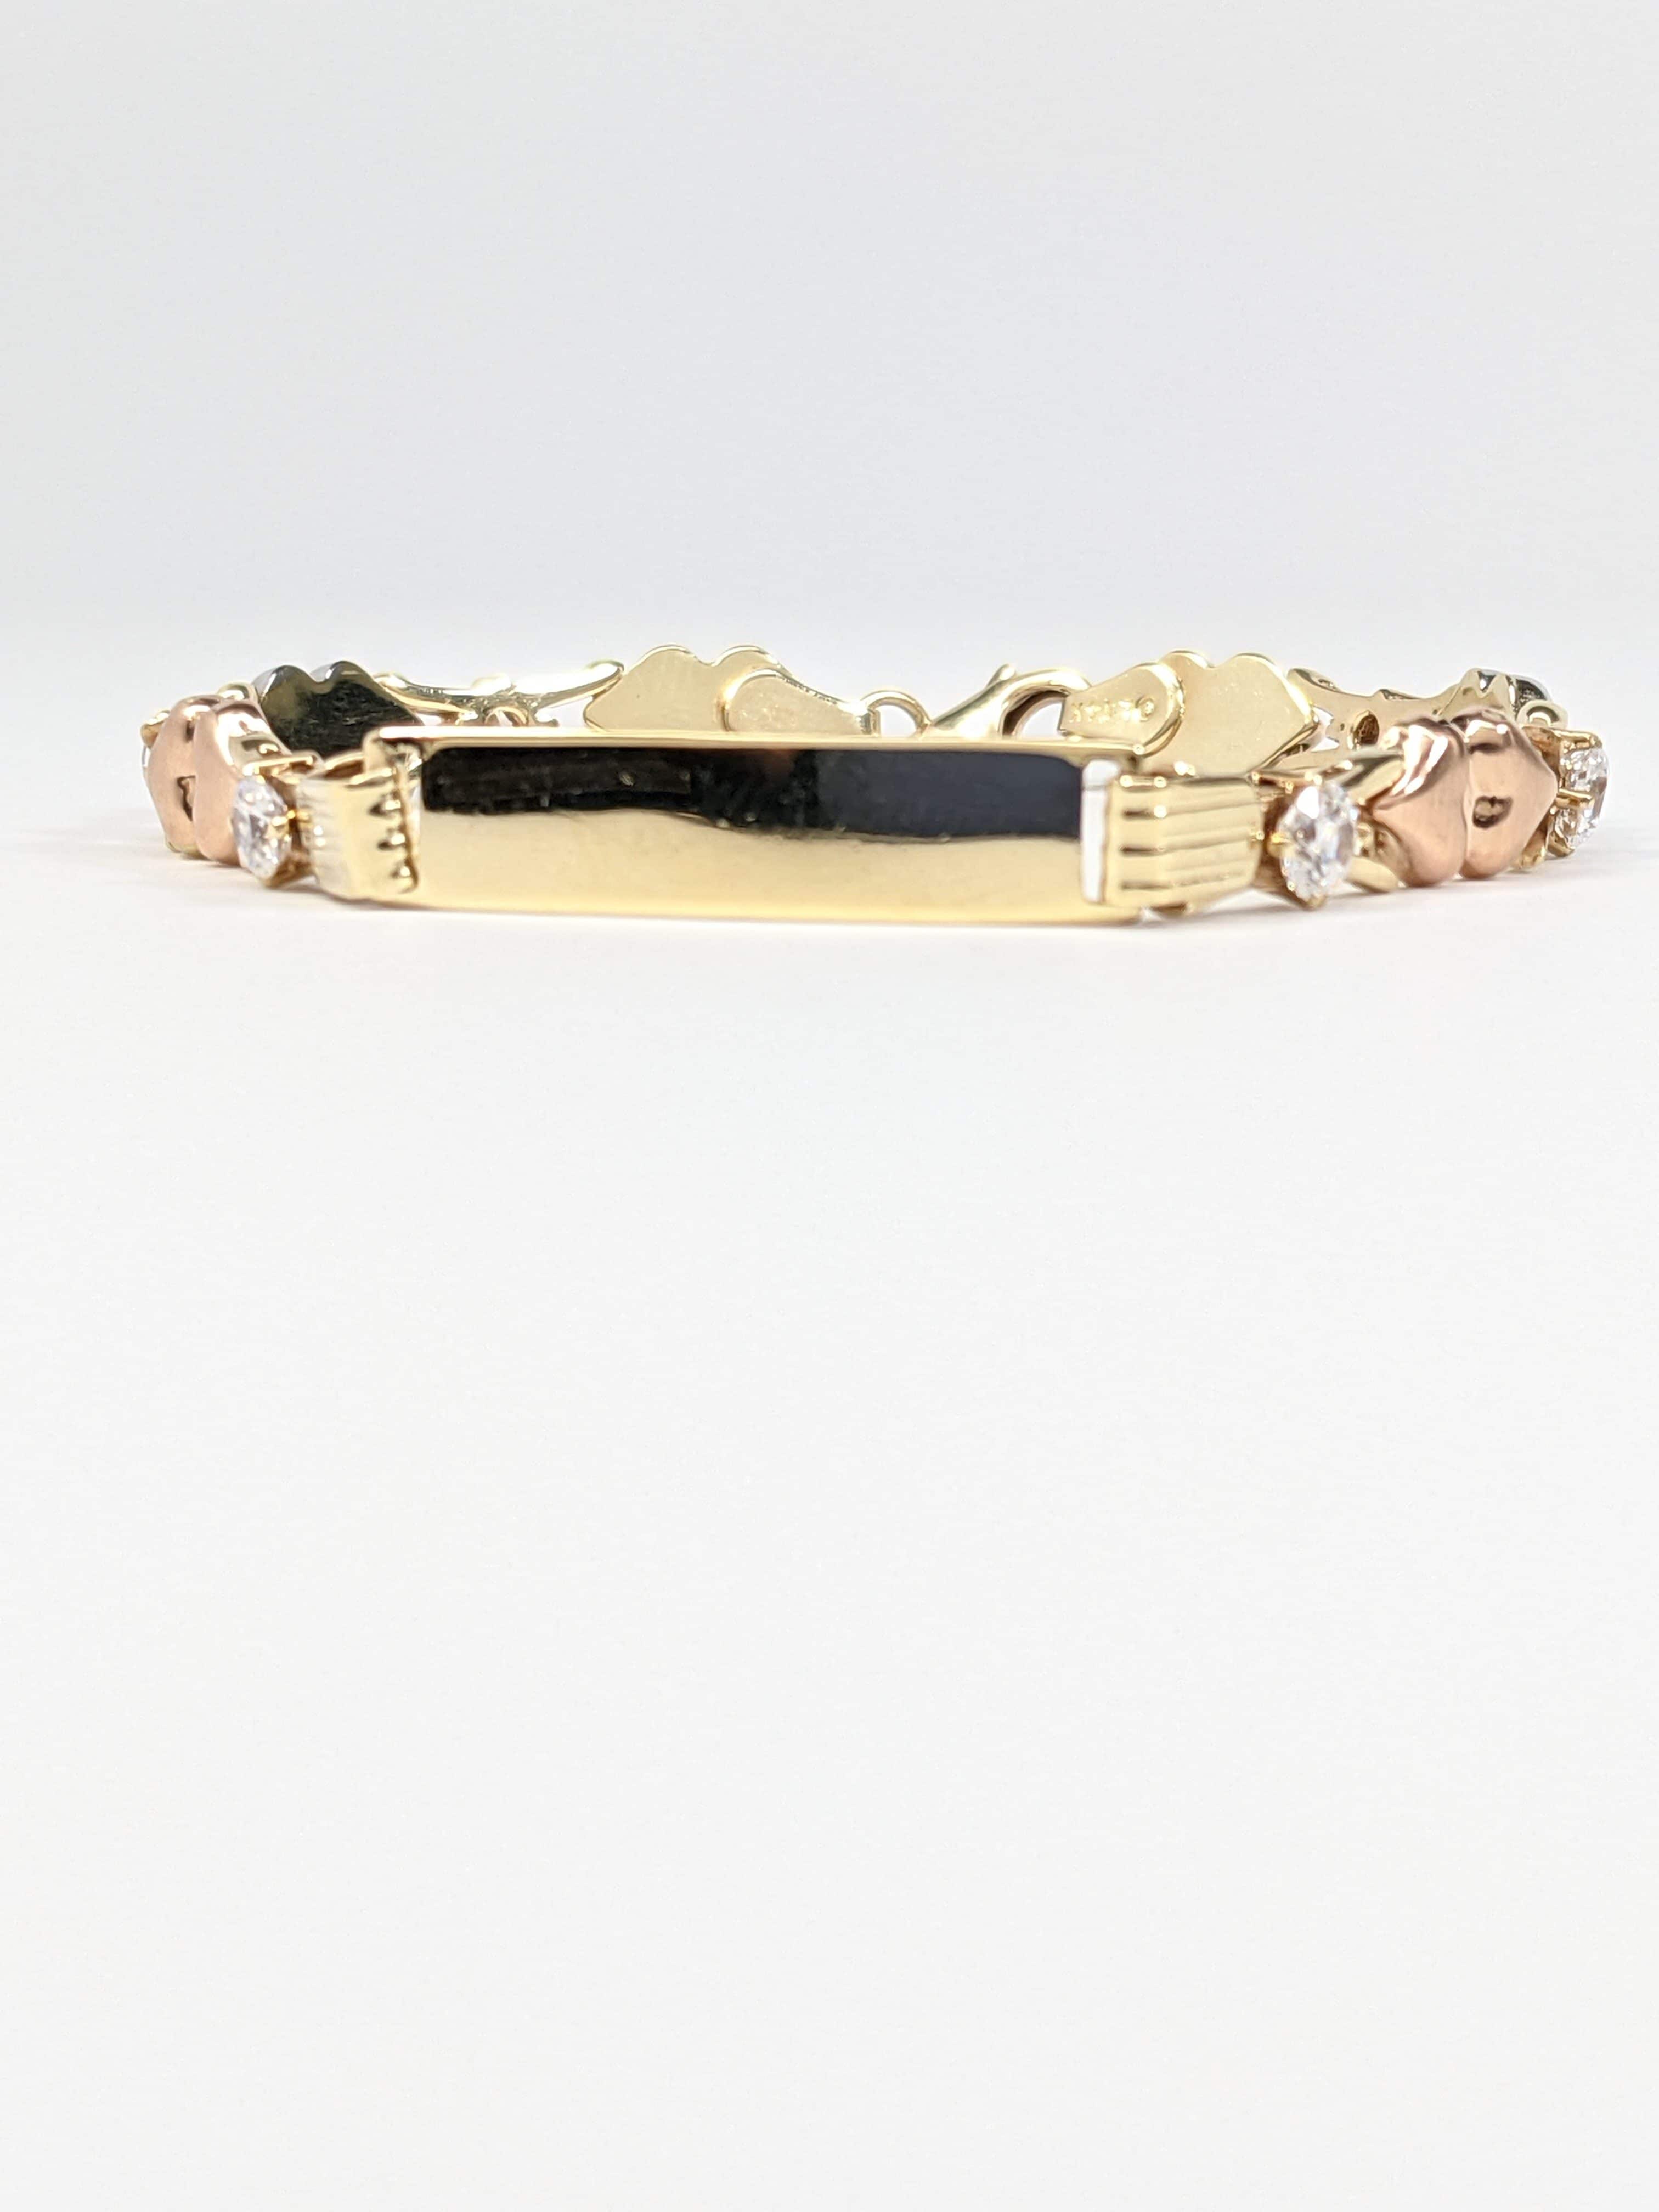 14KT Tri-Color Gold Puffed Heart Baby ID Bracelet with Zirconias Engravable